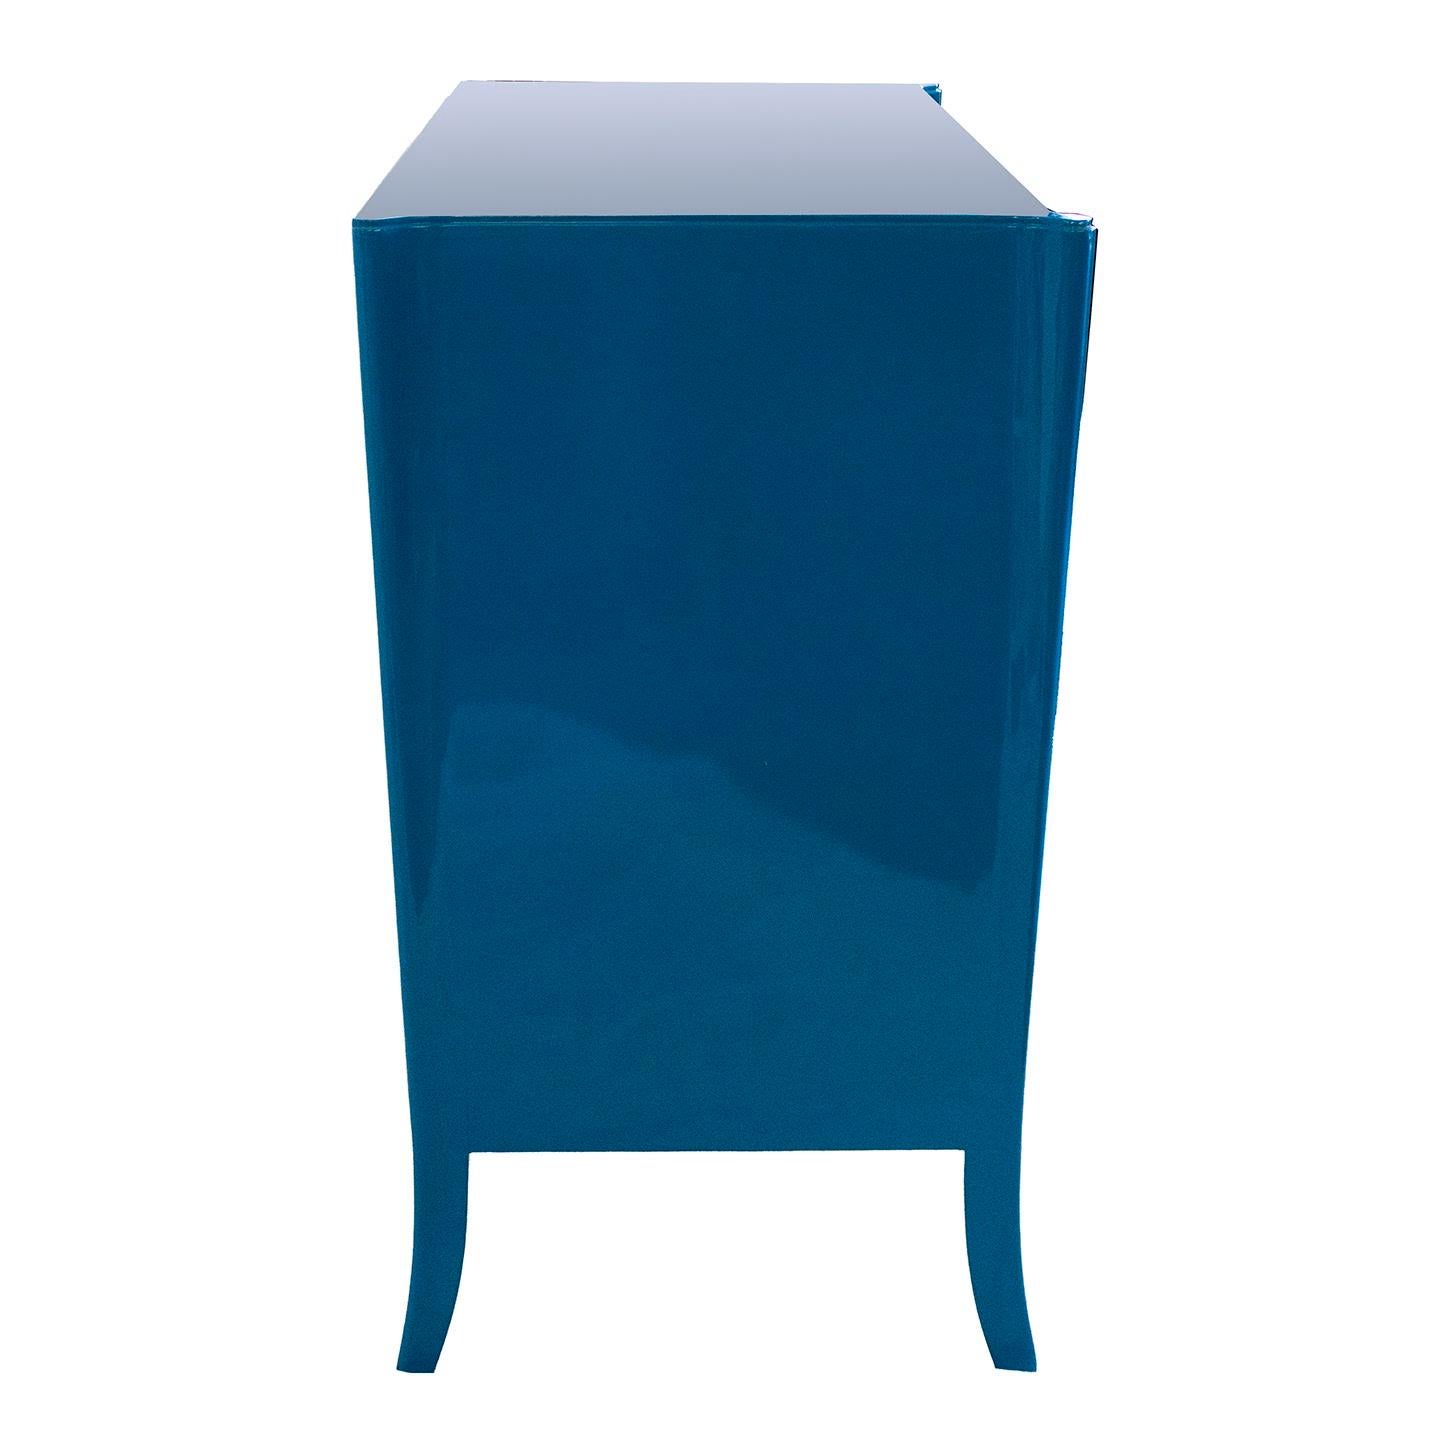 Very rare petite Brown Saltman Furniture Company for Cal-Mode chest, updated with a Laguna Blue lacquer. Brown Saltman Furniture Company, founded in 1941, was a collaboration of Paul Frankl and David Saltman. The Laguna Blue lacquer paint gives it